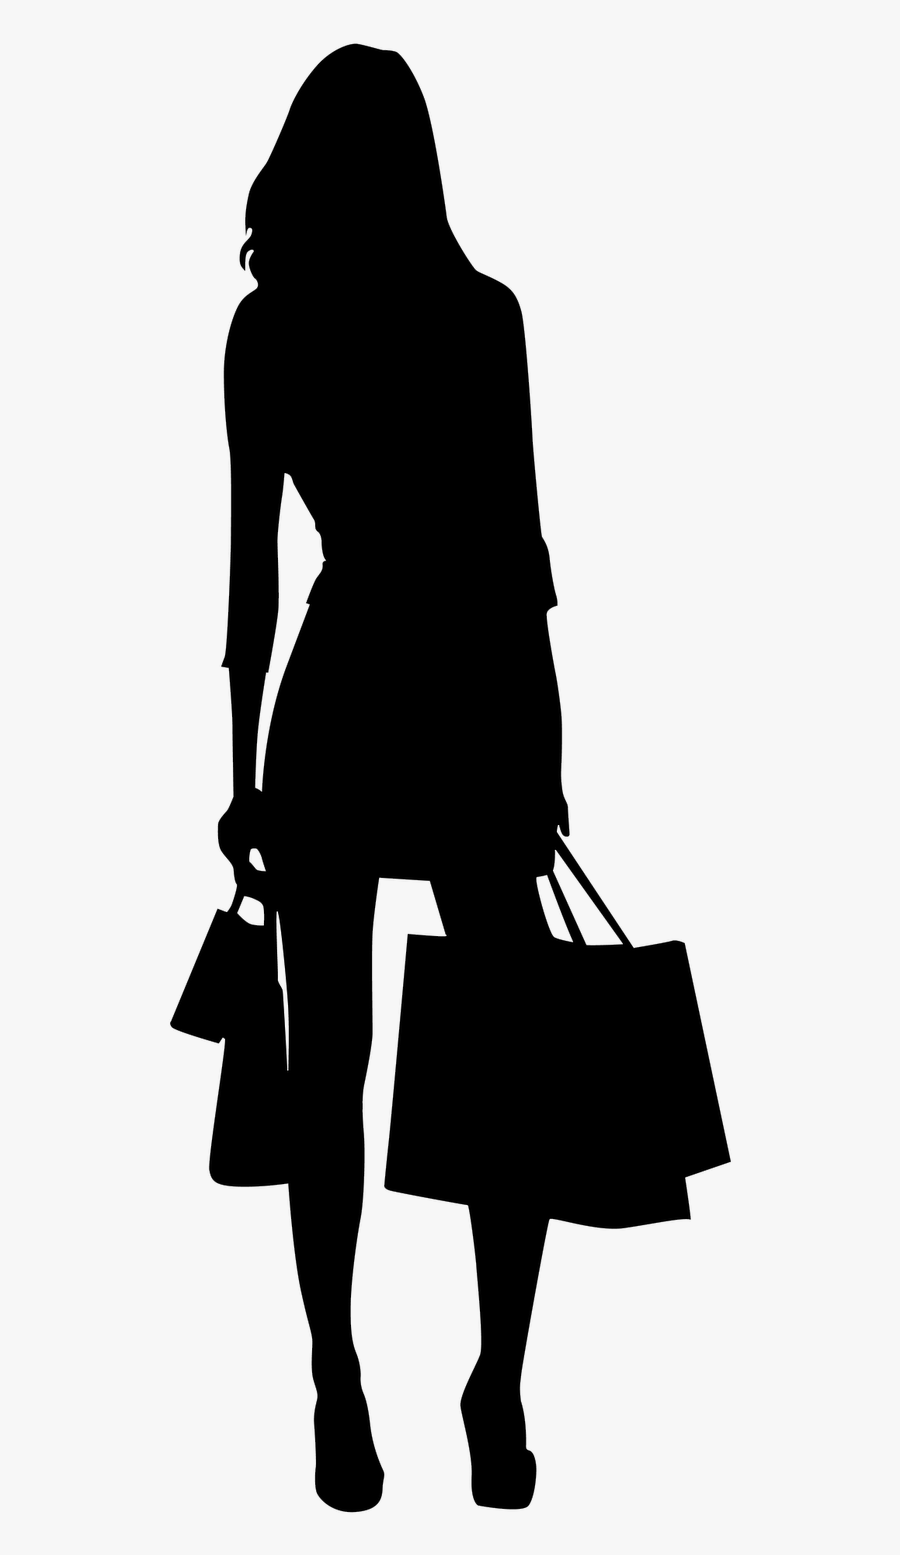 Lady Shopping - Woman Shopping Silhouette, Transparent Clipart